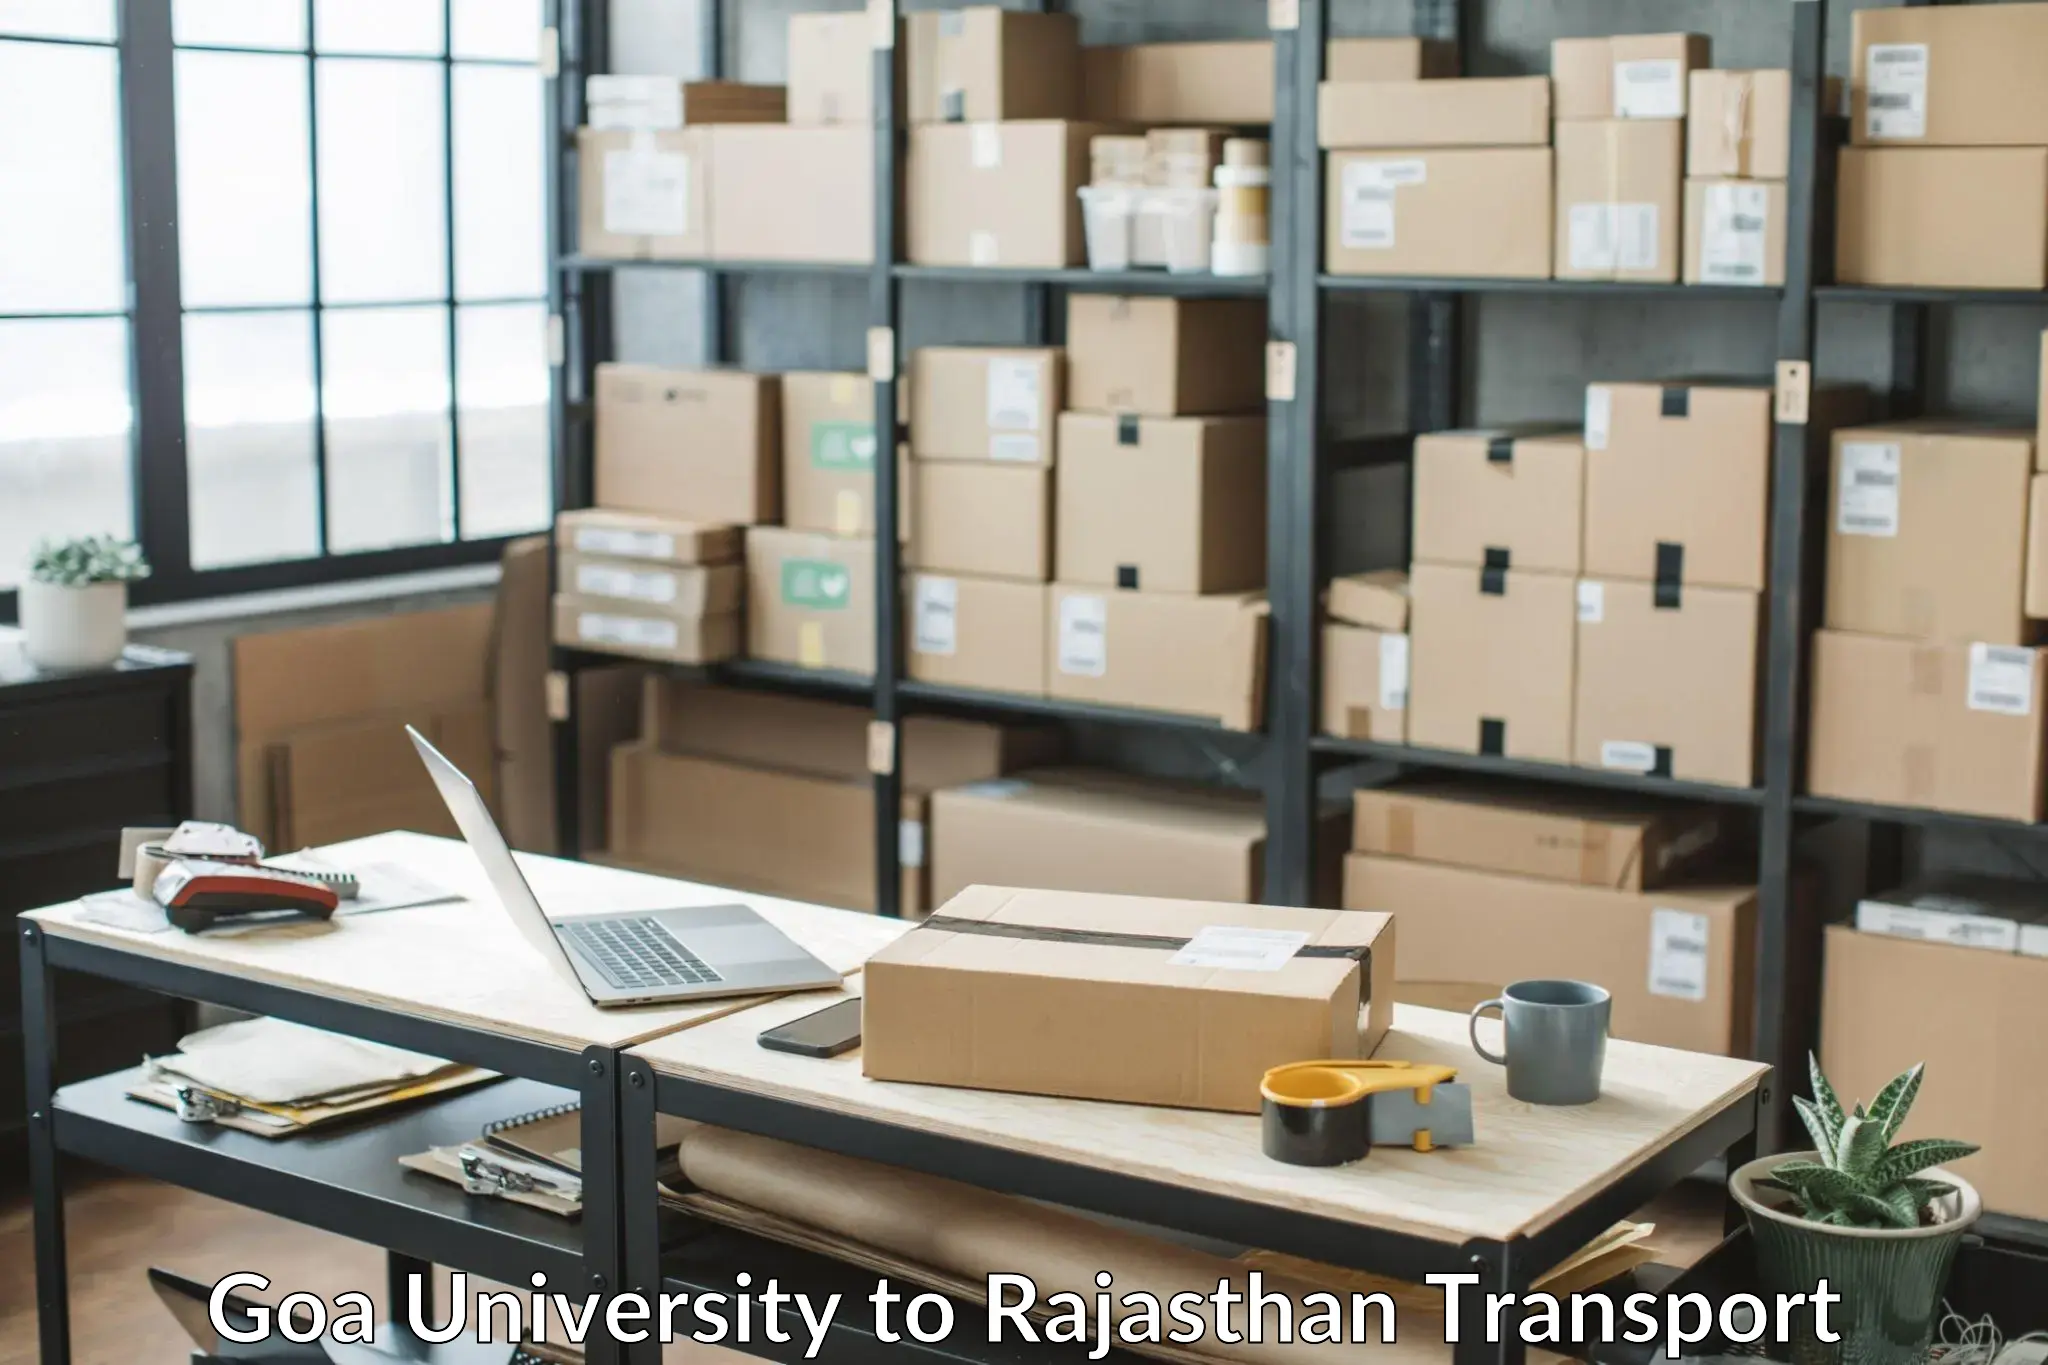 Container transport service Goa University to Rajasthan